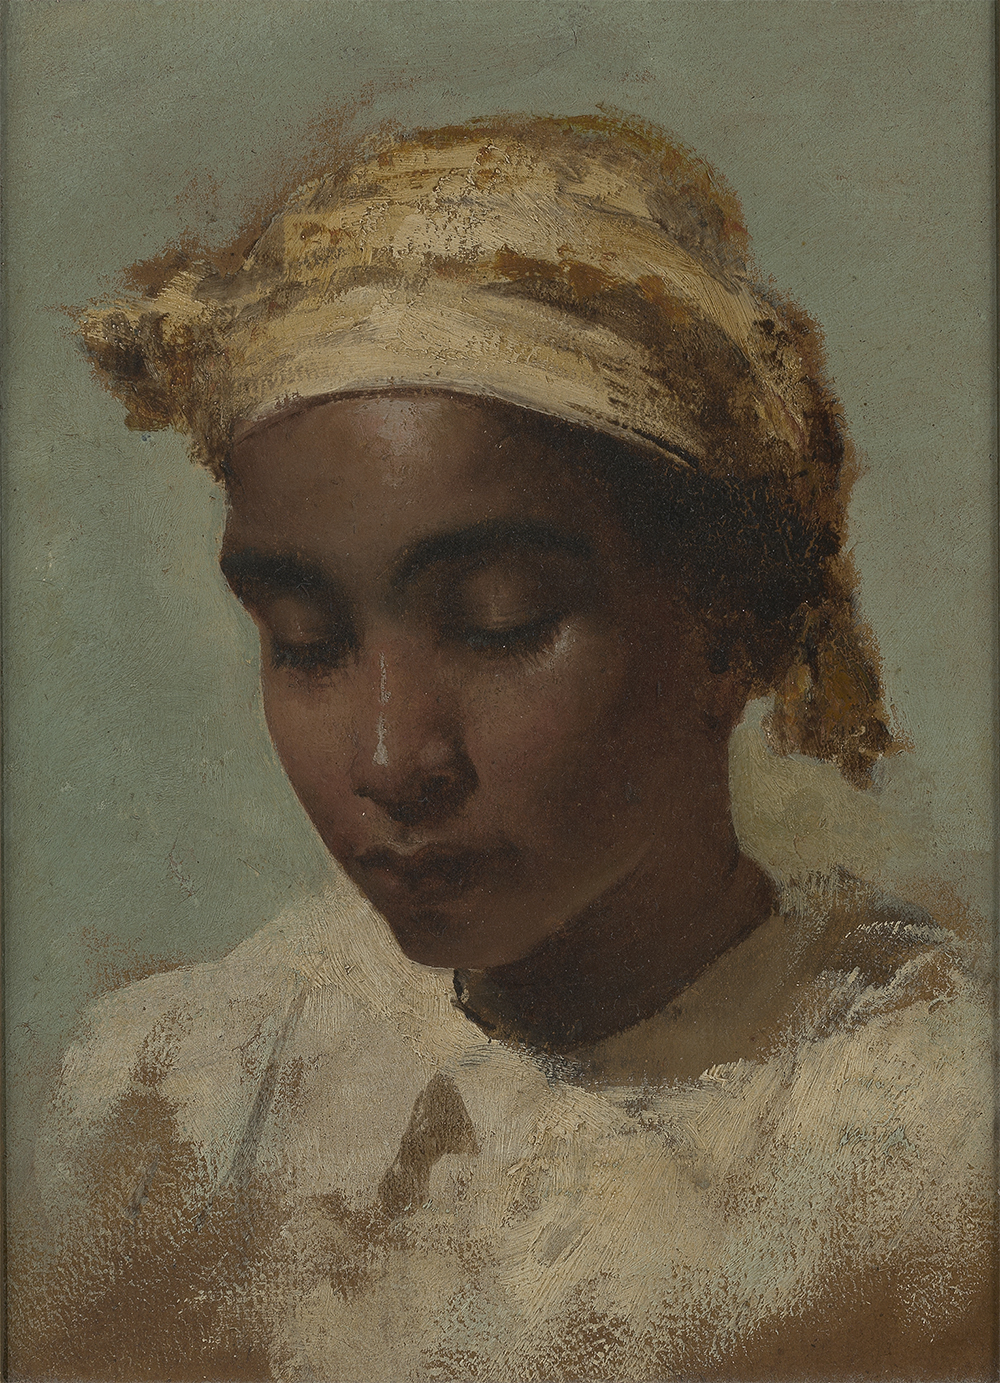 Painted portrait of a young girl of African descent gazing down and wearing a tied yellow fabric headwrap